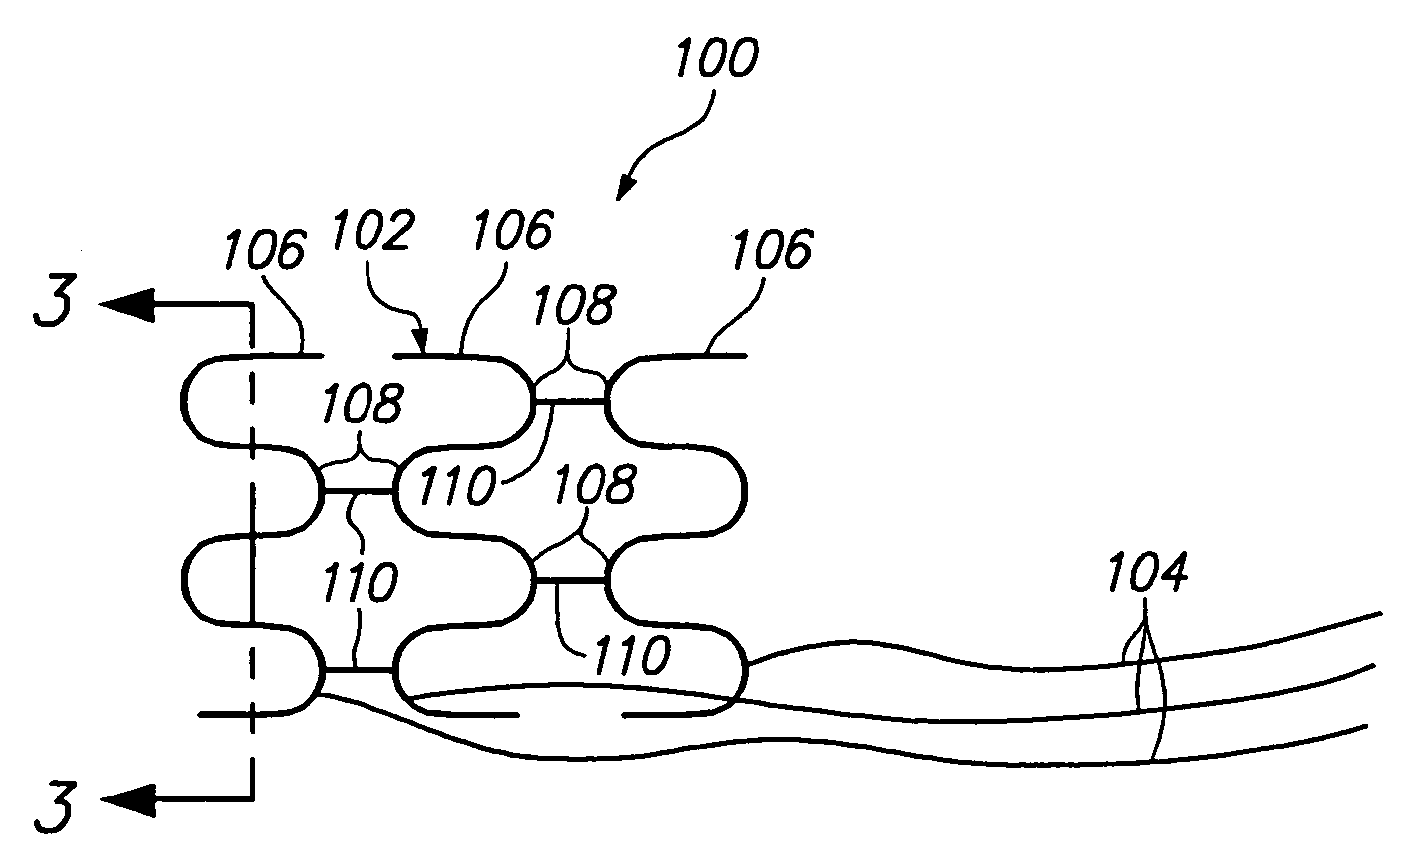 Intravascular self-anchoring electrode body with arcuate springs, spring loops, or arms